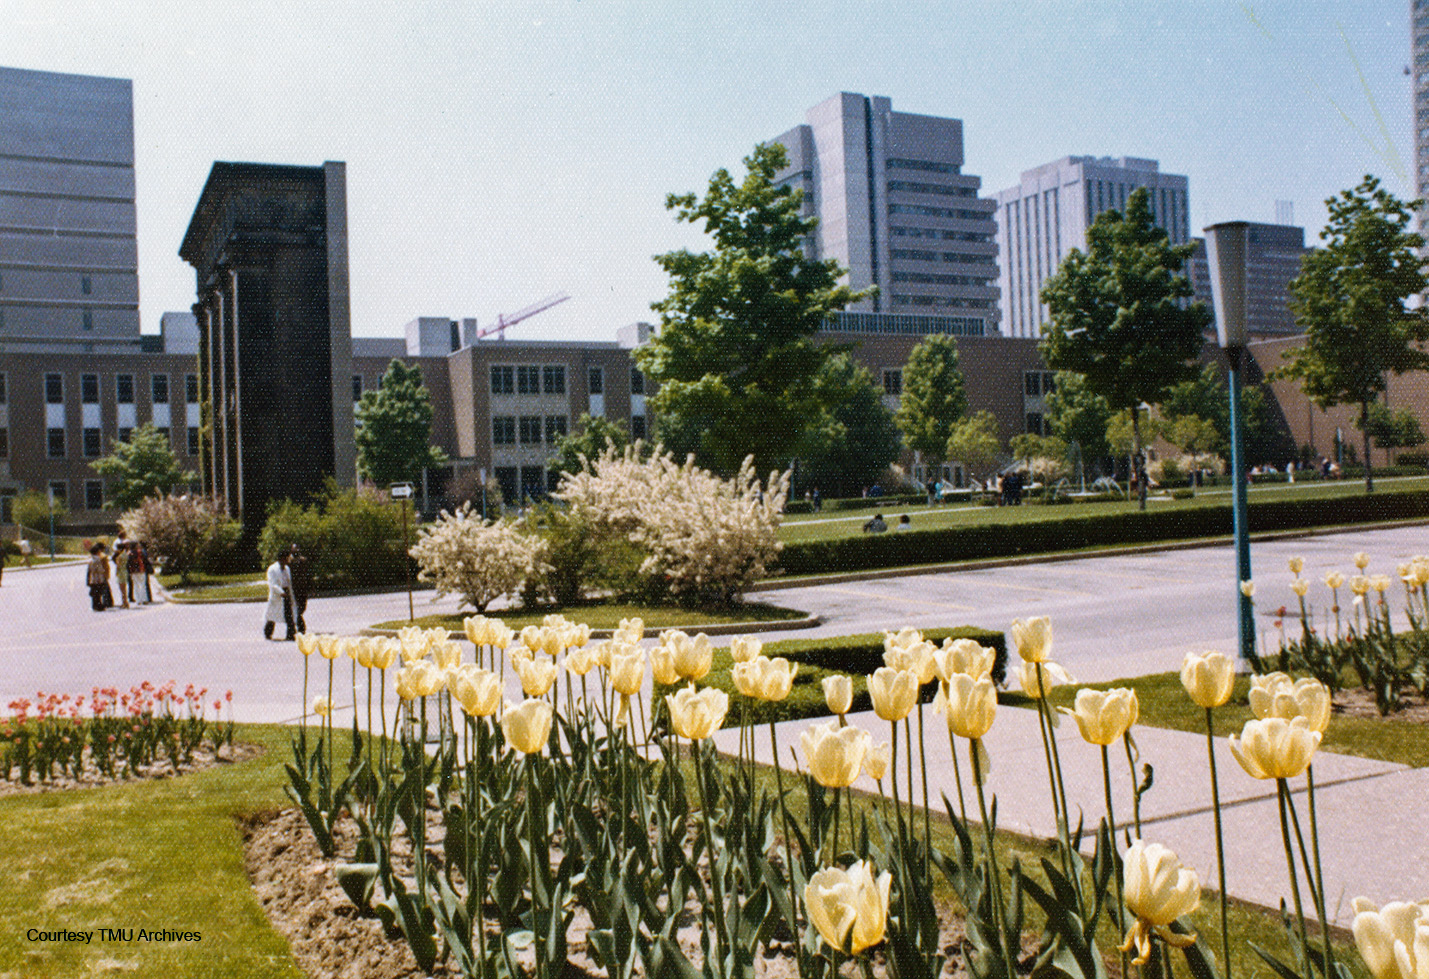 Yellow tulips line the sidewalk in the foreground of the quad, with the Normal School facade and other school buildings in the background.